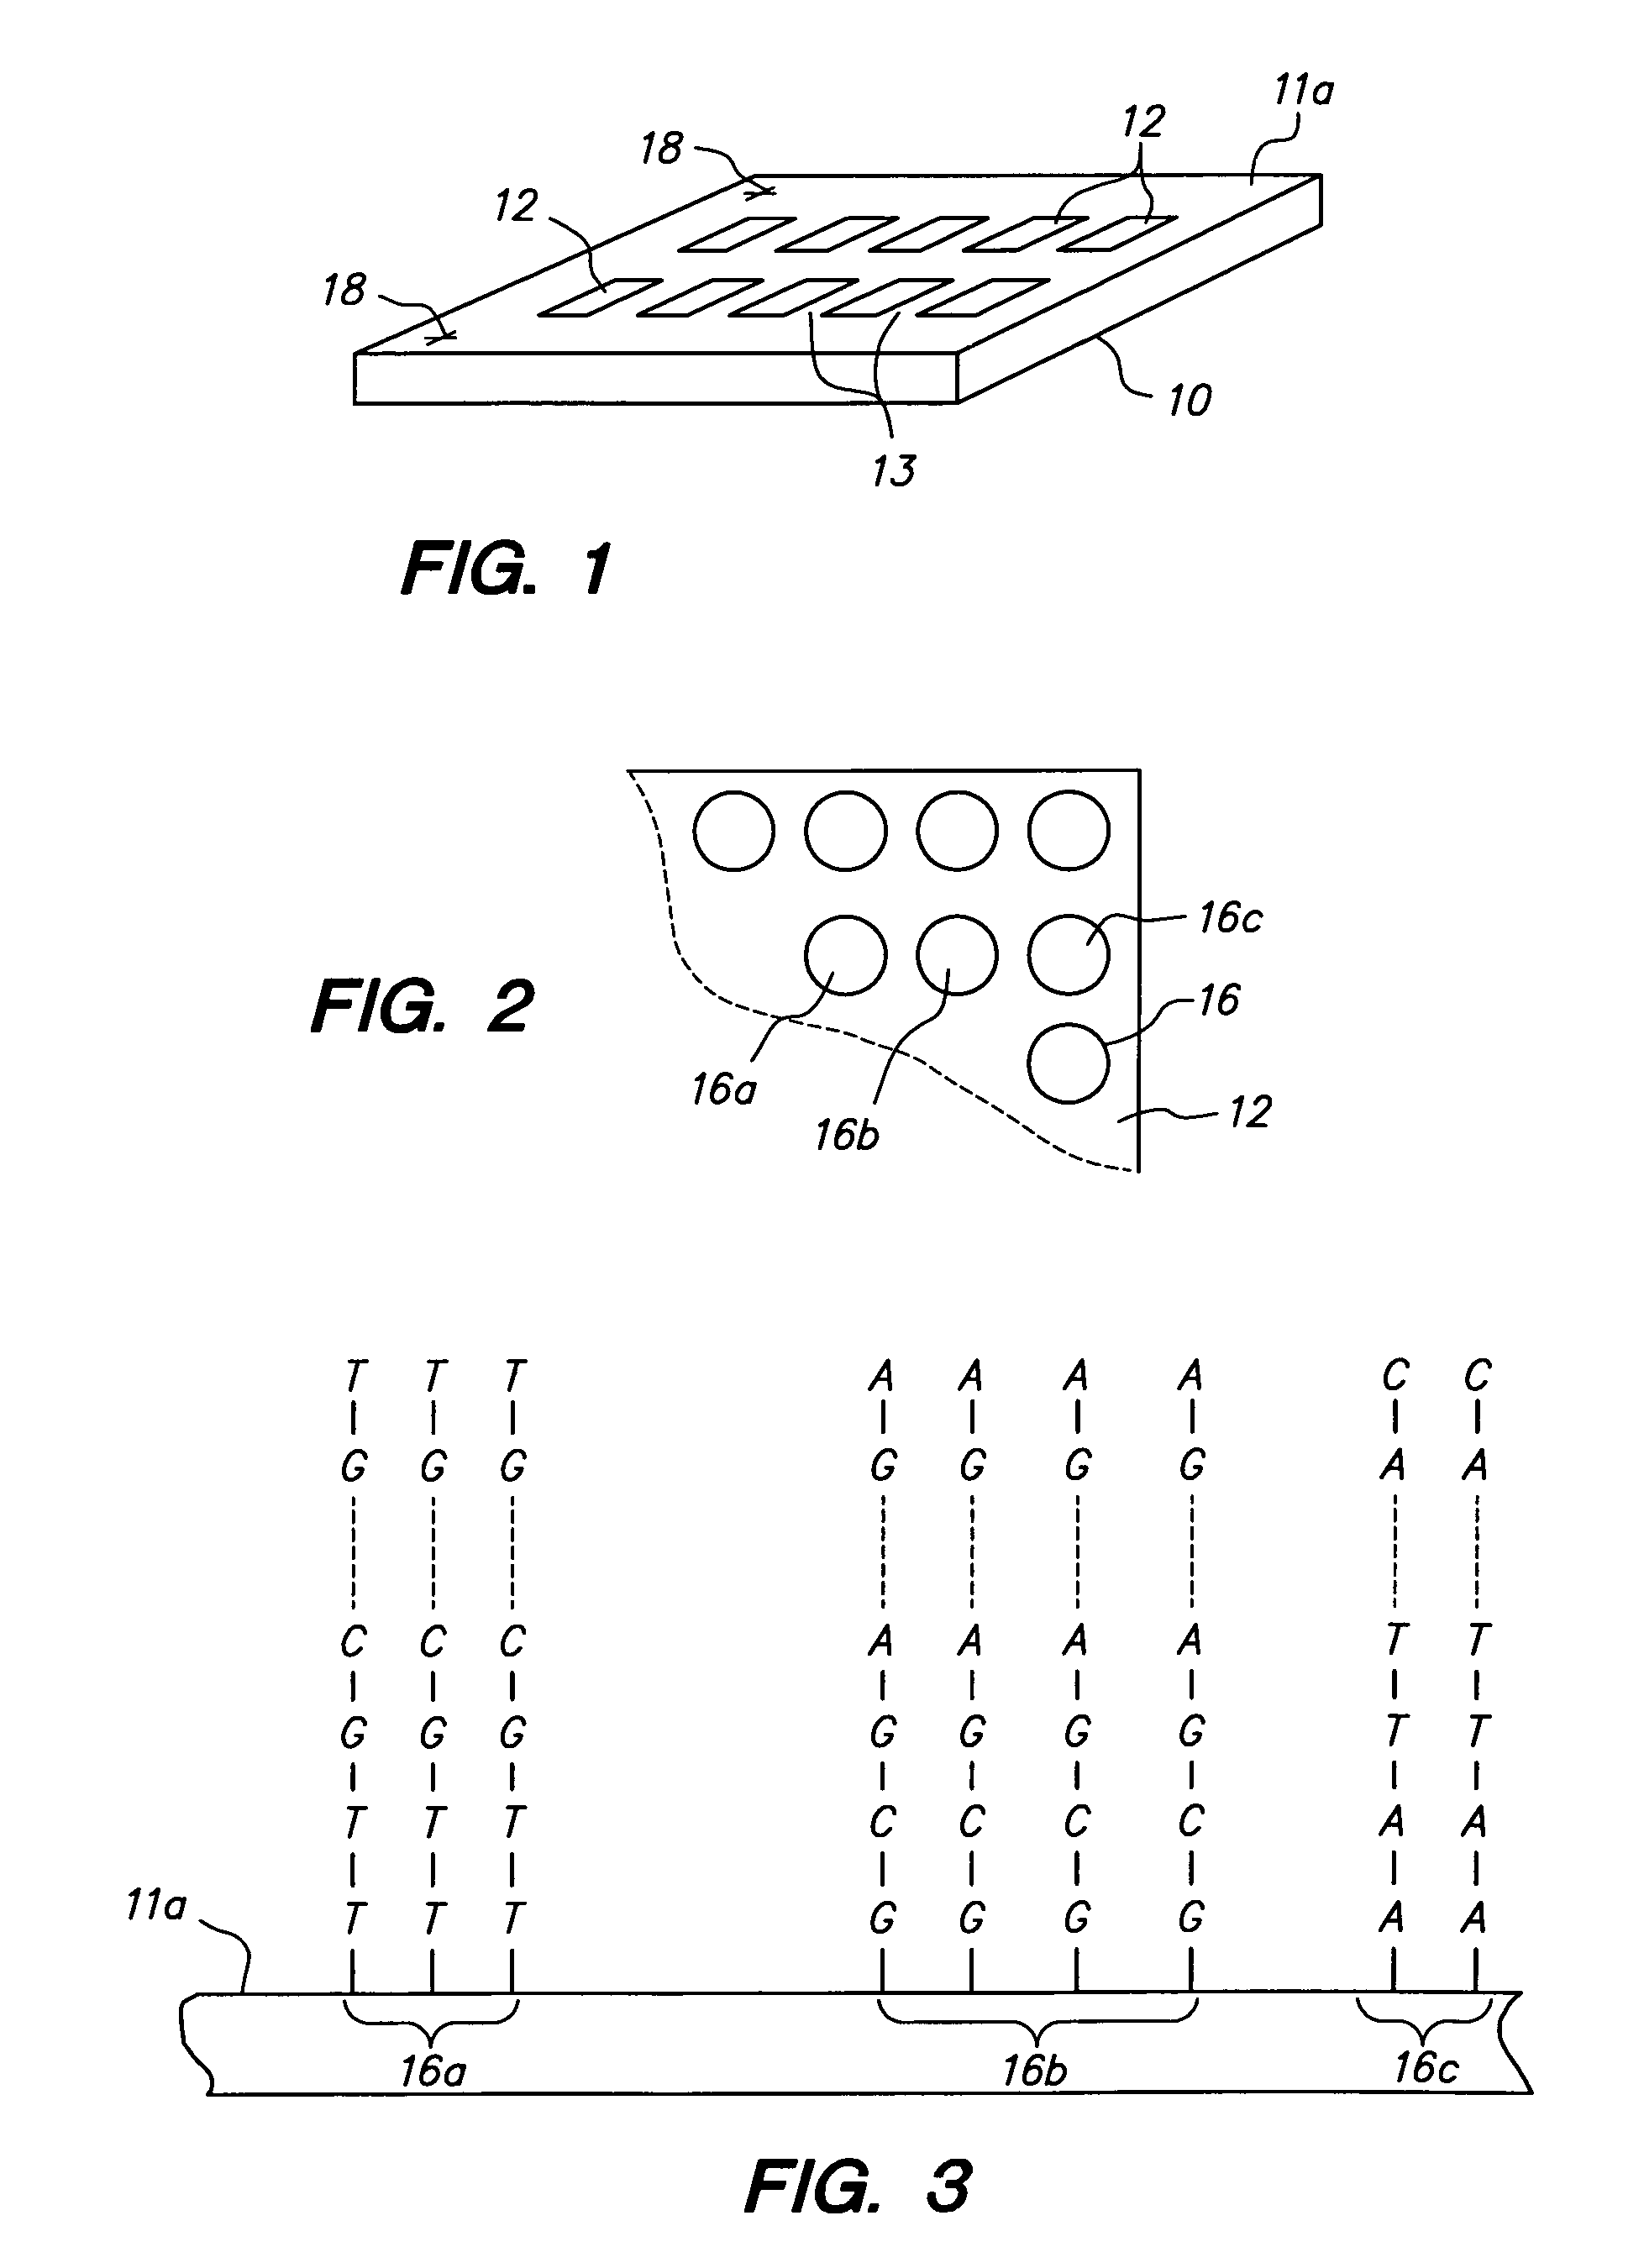 Methods of fabricating an addressable array of biopolymer probes